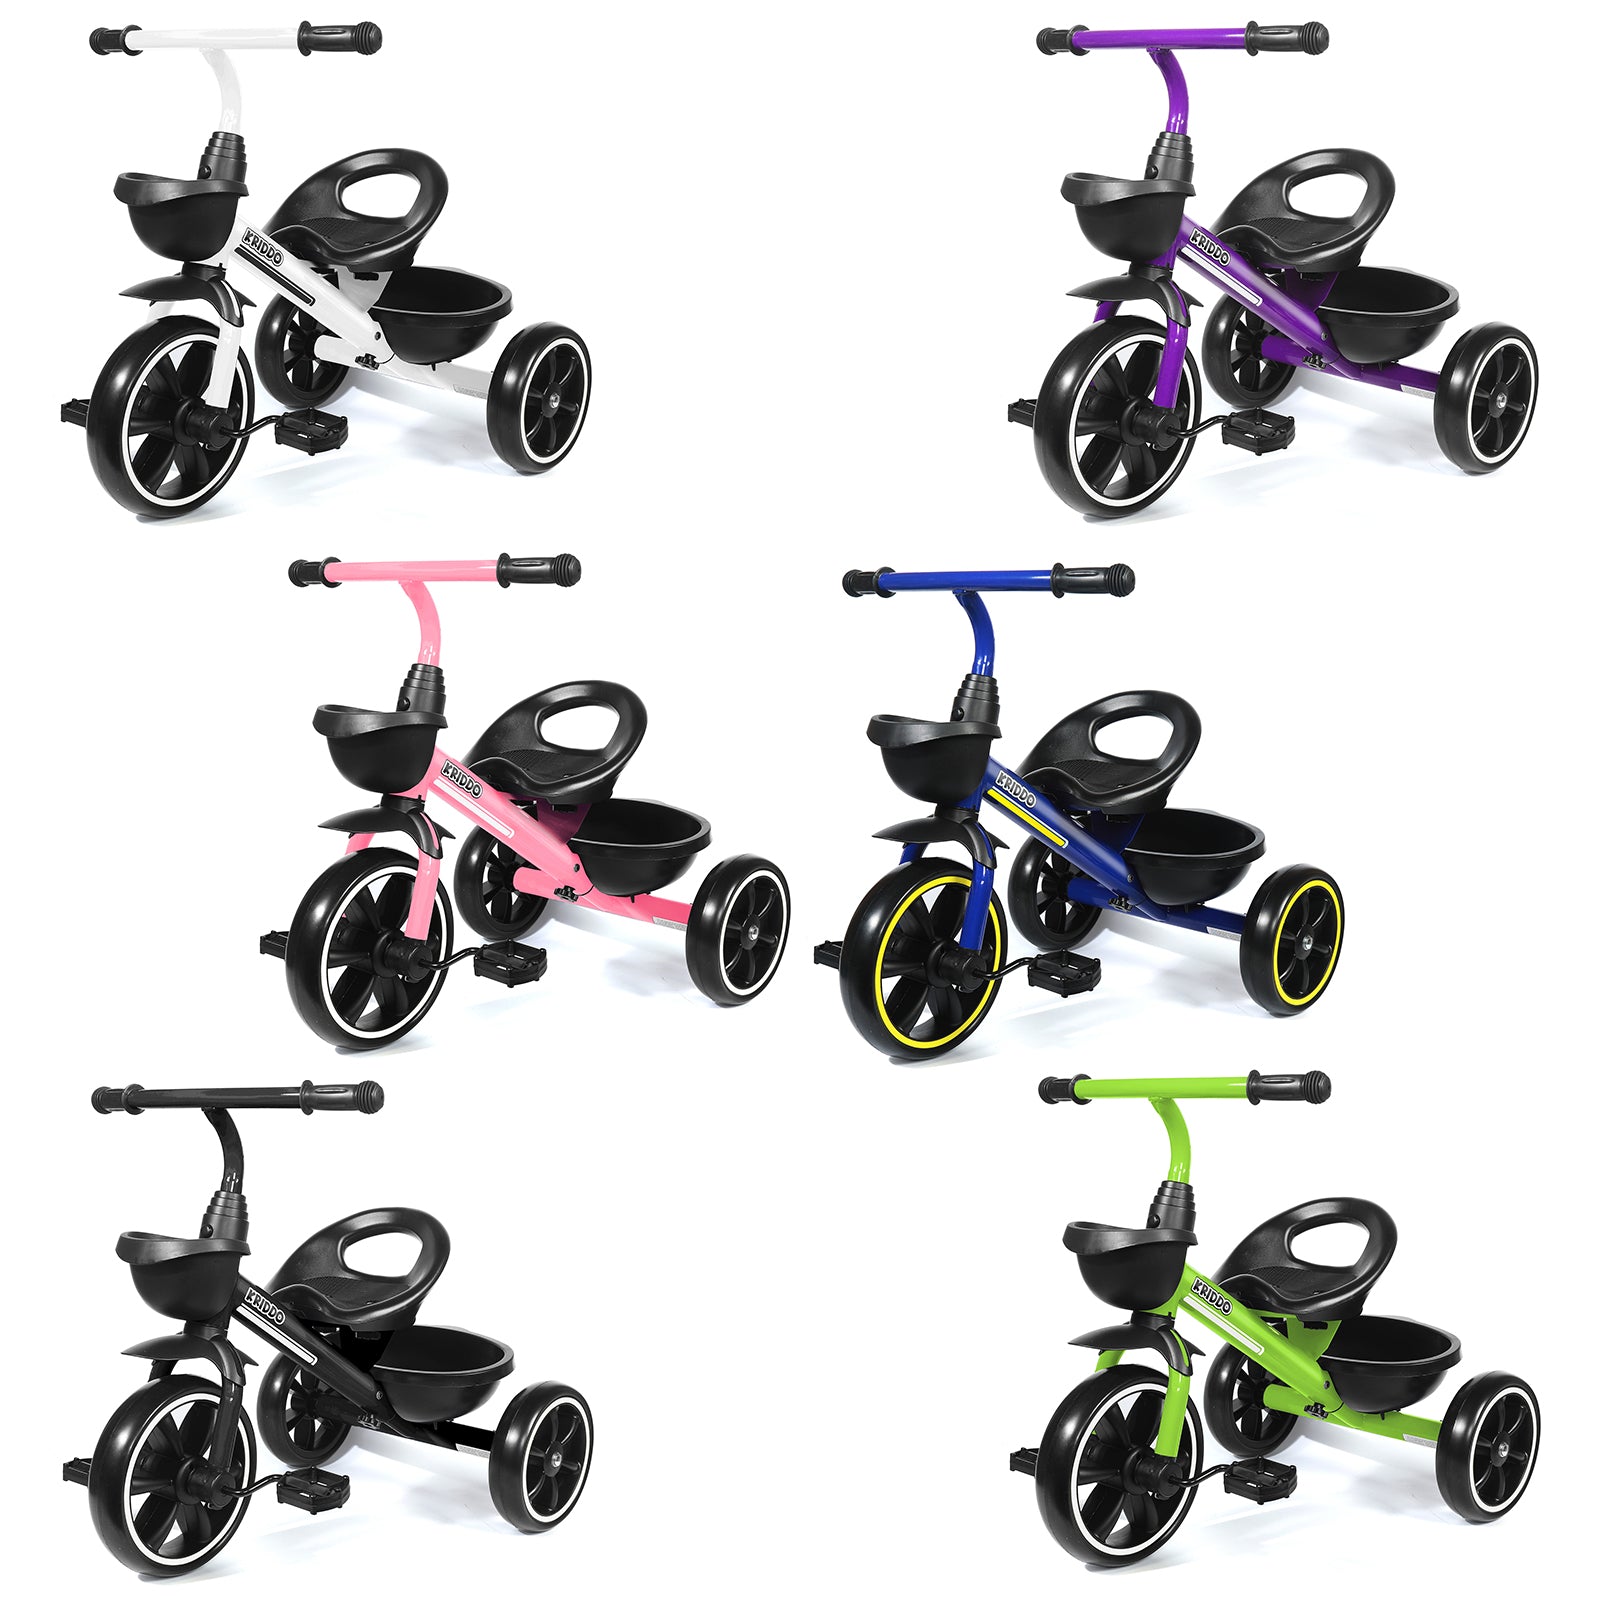 [LIMITED TIME SUPRISE] KRIDDO Kids Tricycles for 2- 5 Years, Storage Bin, Easy Assembly, RANDOM COLOR